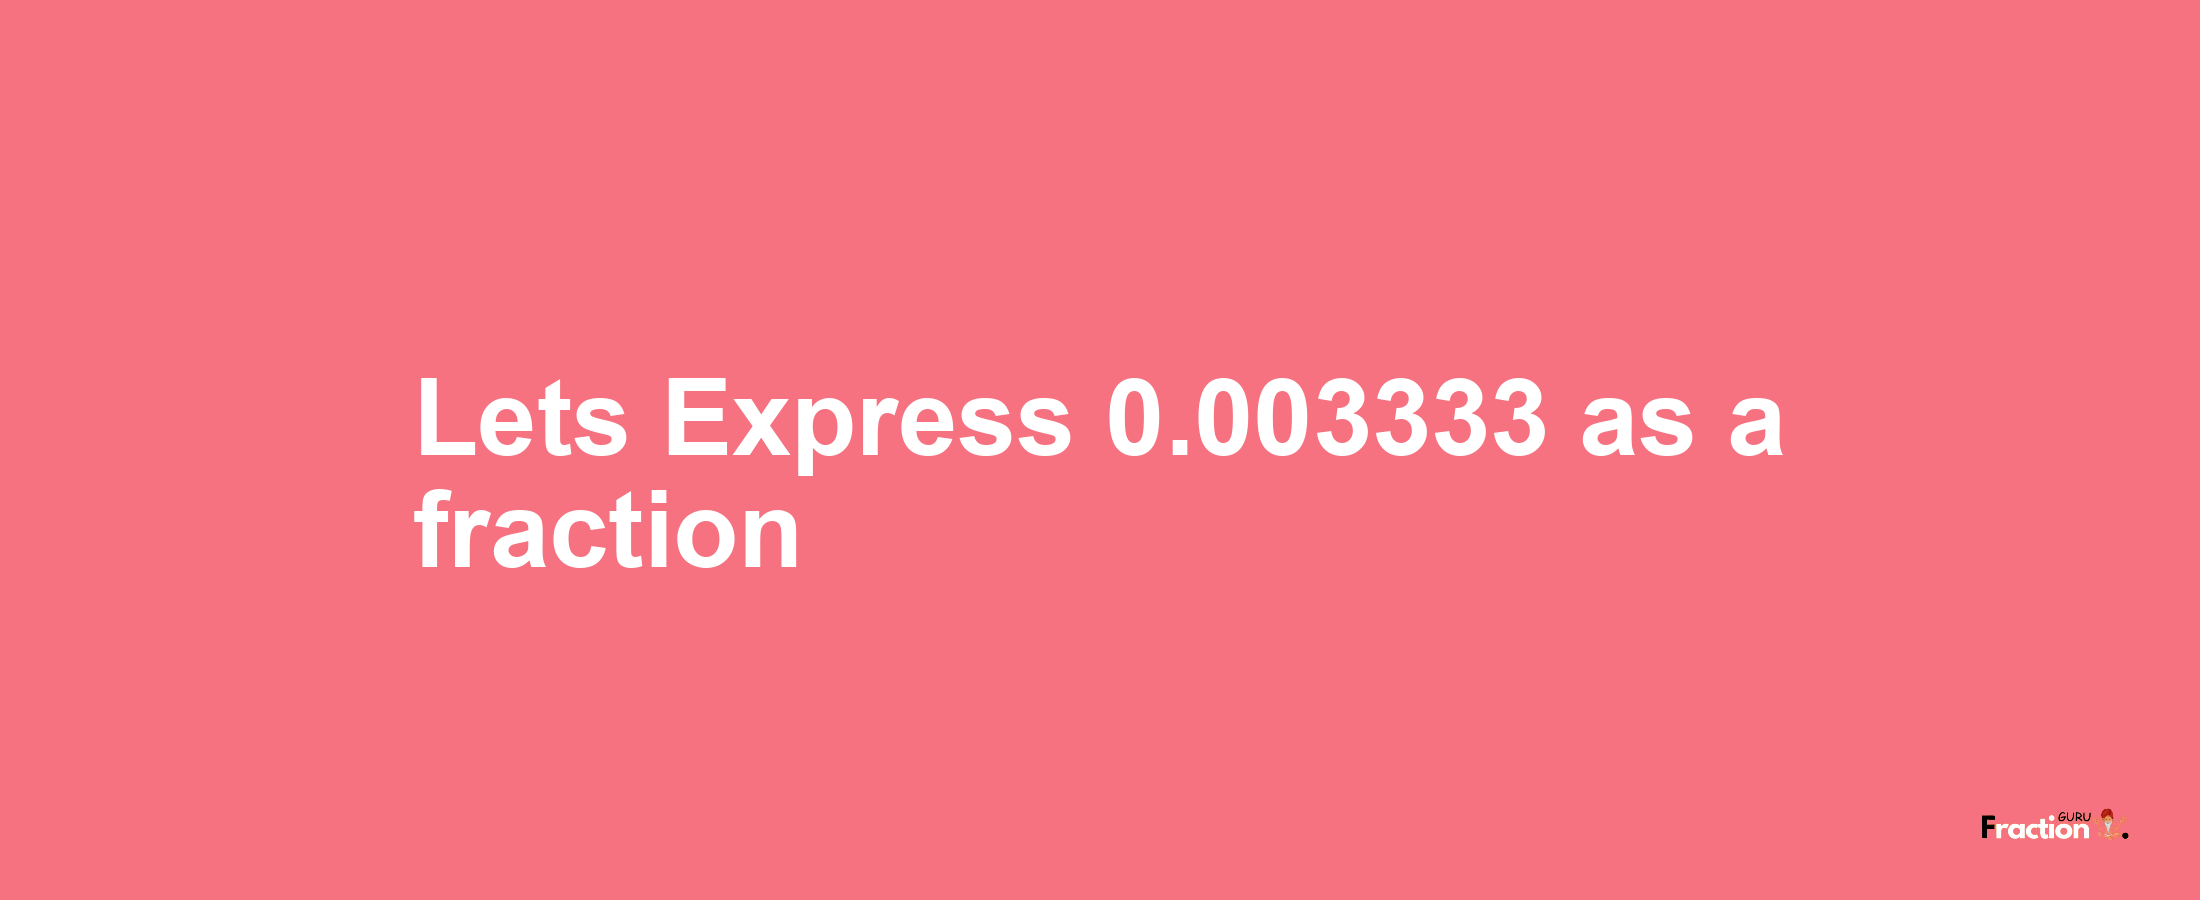 Lets Express 0.003333 as afraction